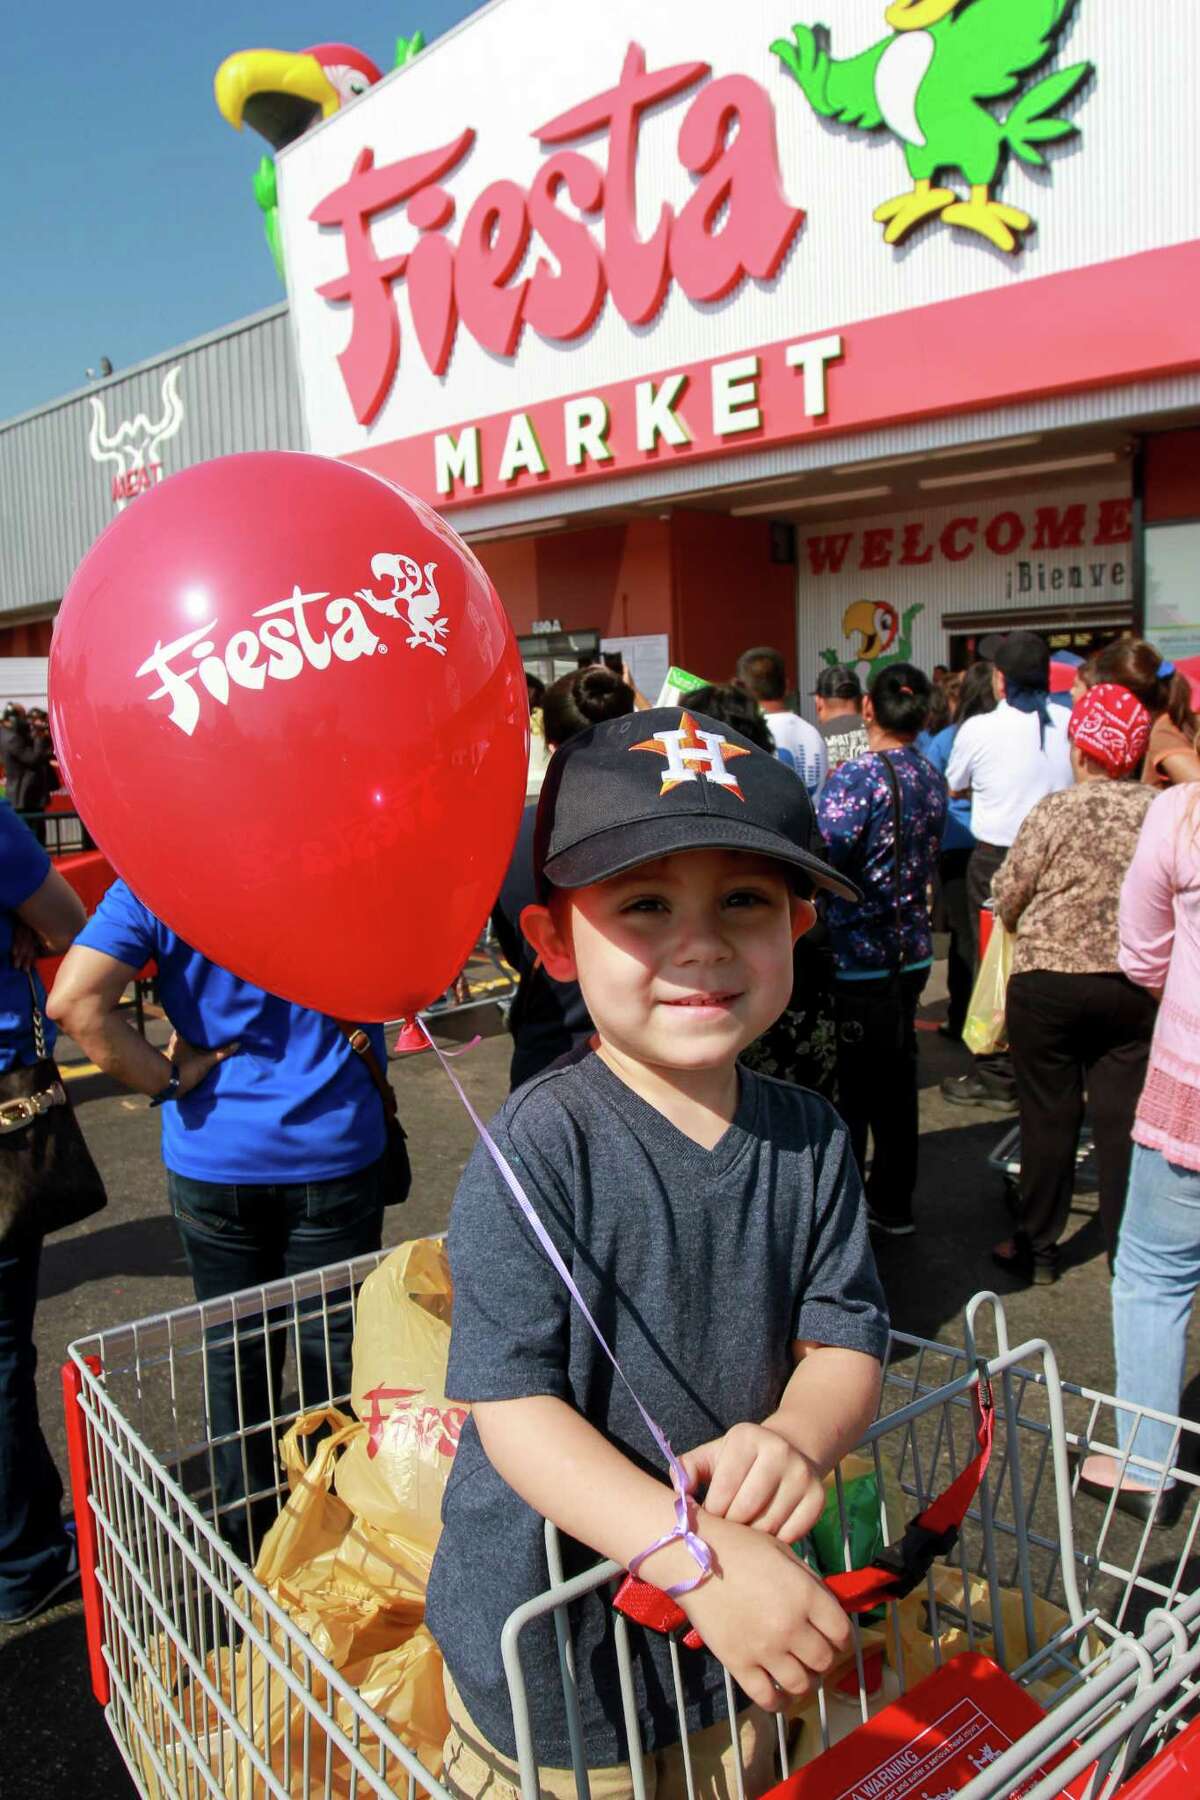 Three-year-old Mikey Gonzales at the grand re-opening of the Fiesta on Wayside Drive. Fiesta has invested in the store, redesigning and updating its appearance and layout, the first of several planned upgrades at the chain's stores. Mikey was with his mother, Letty Gonzales. (For the Chronicle/Gary Fountain, August 31, 2016)